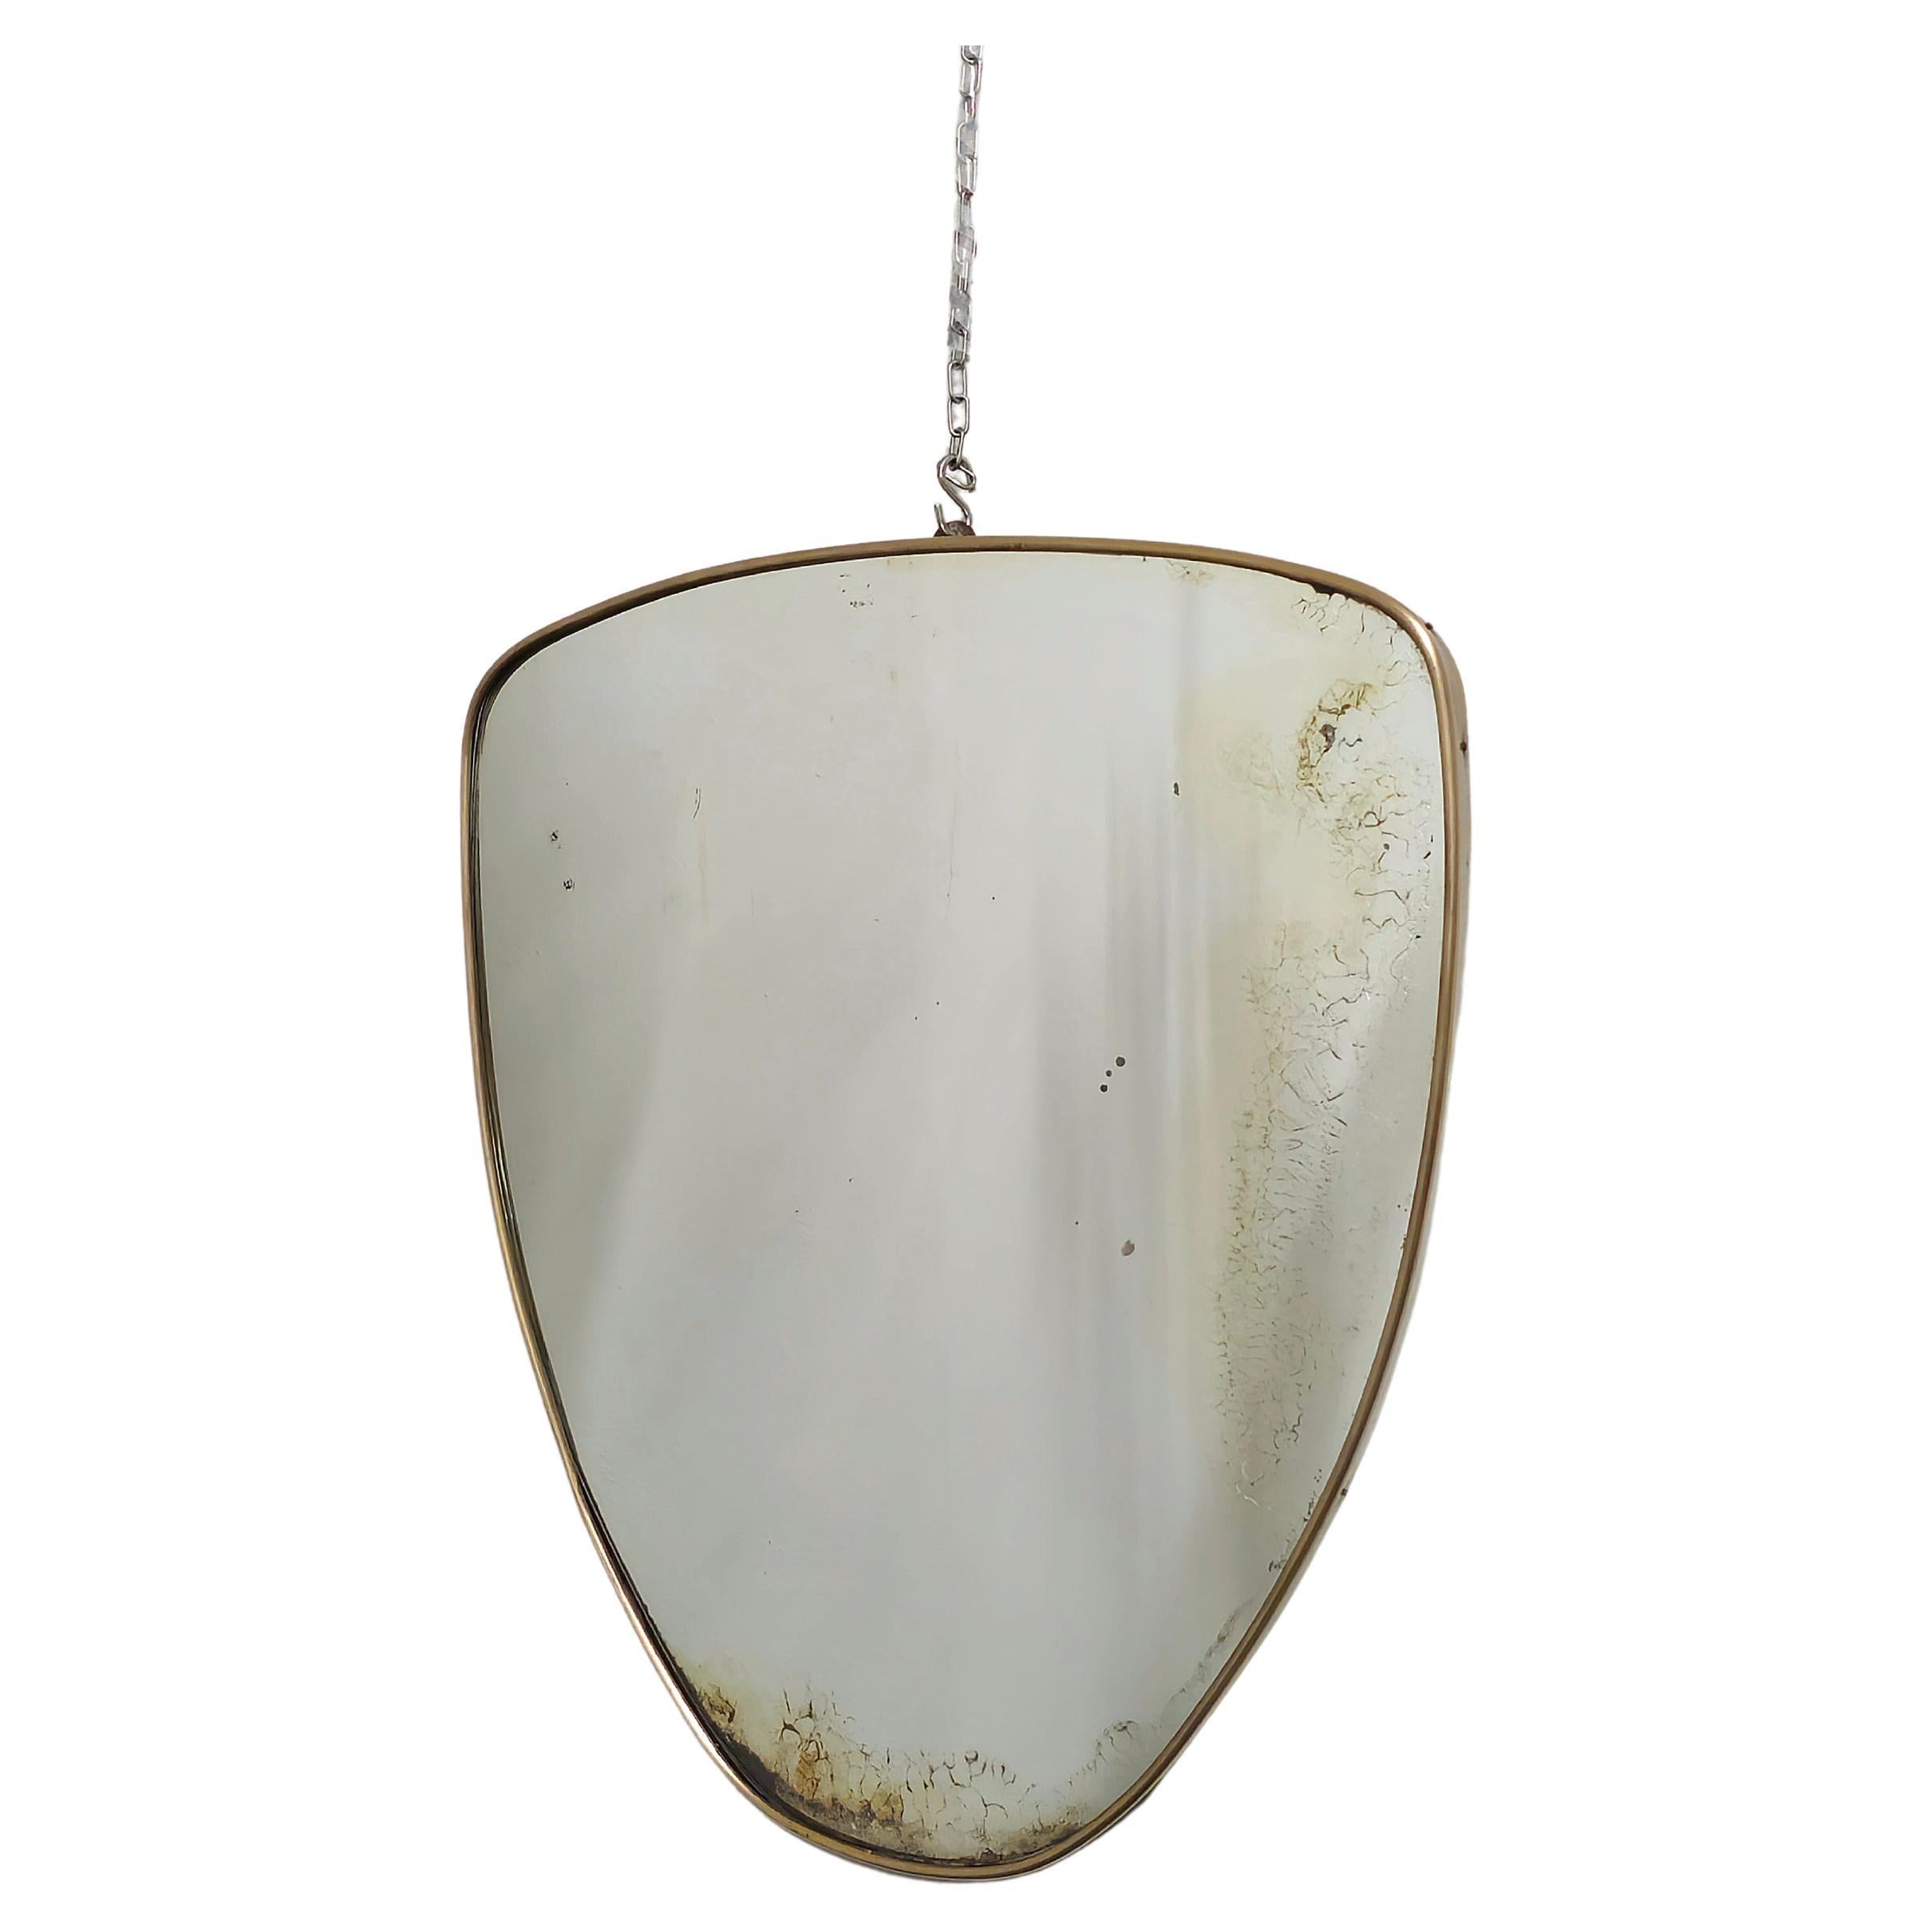 Wall mirror with brass frame in the style of Gio Ponti, 1950s. Shield shape, mirrored crystal. Defects in the mirroring. It retains all its original parts.

On request it is possible to replace the worn glass.

Weight: 3950 grams

Note: We try to